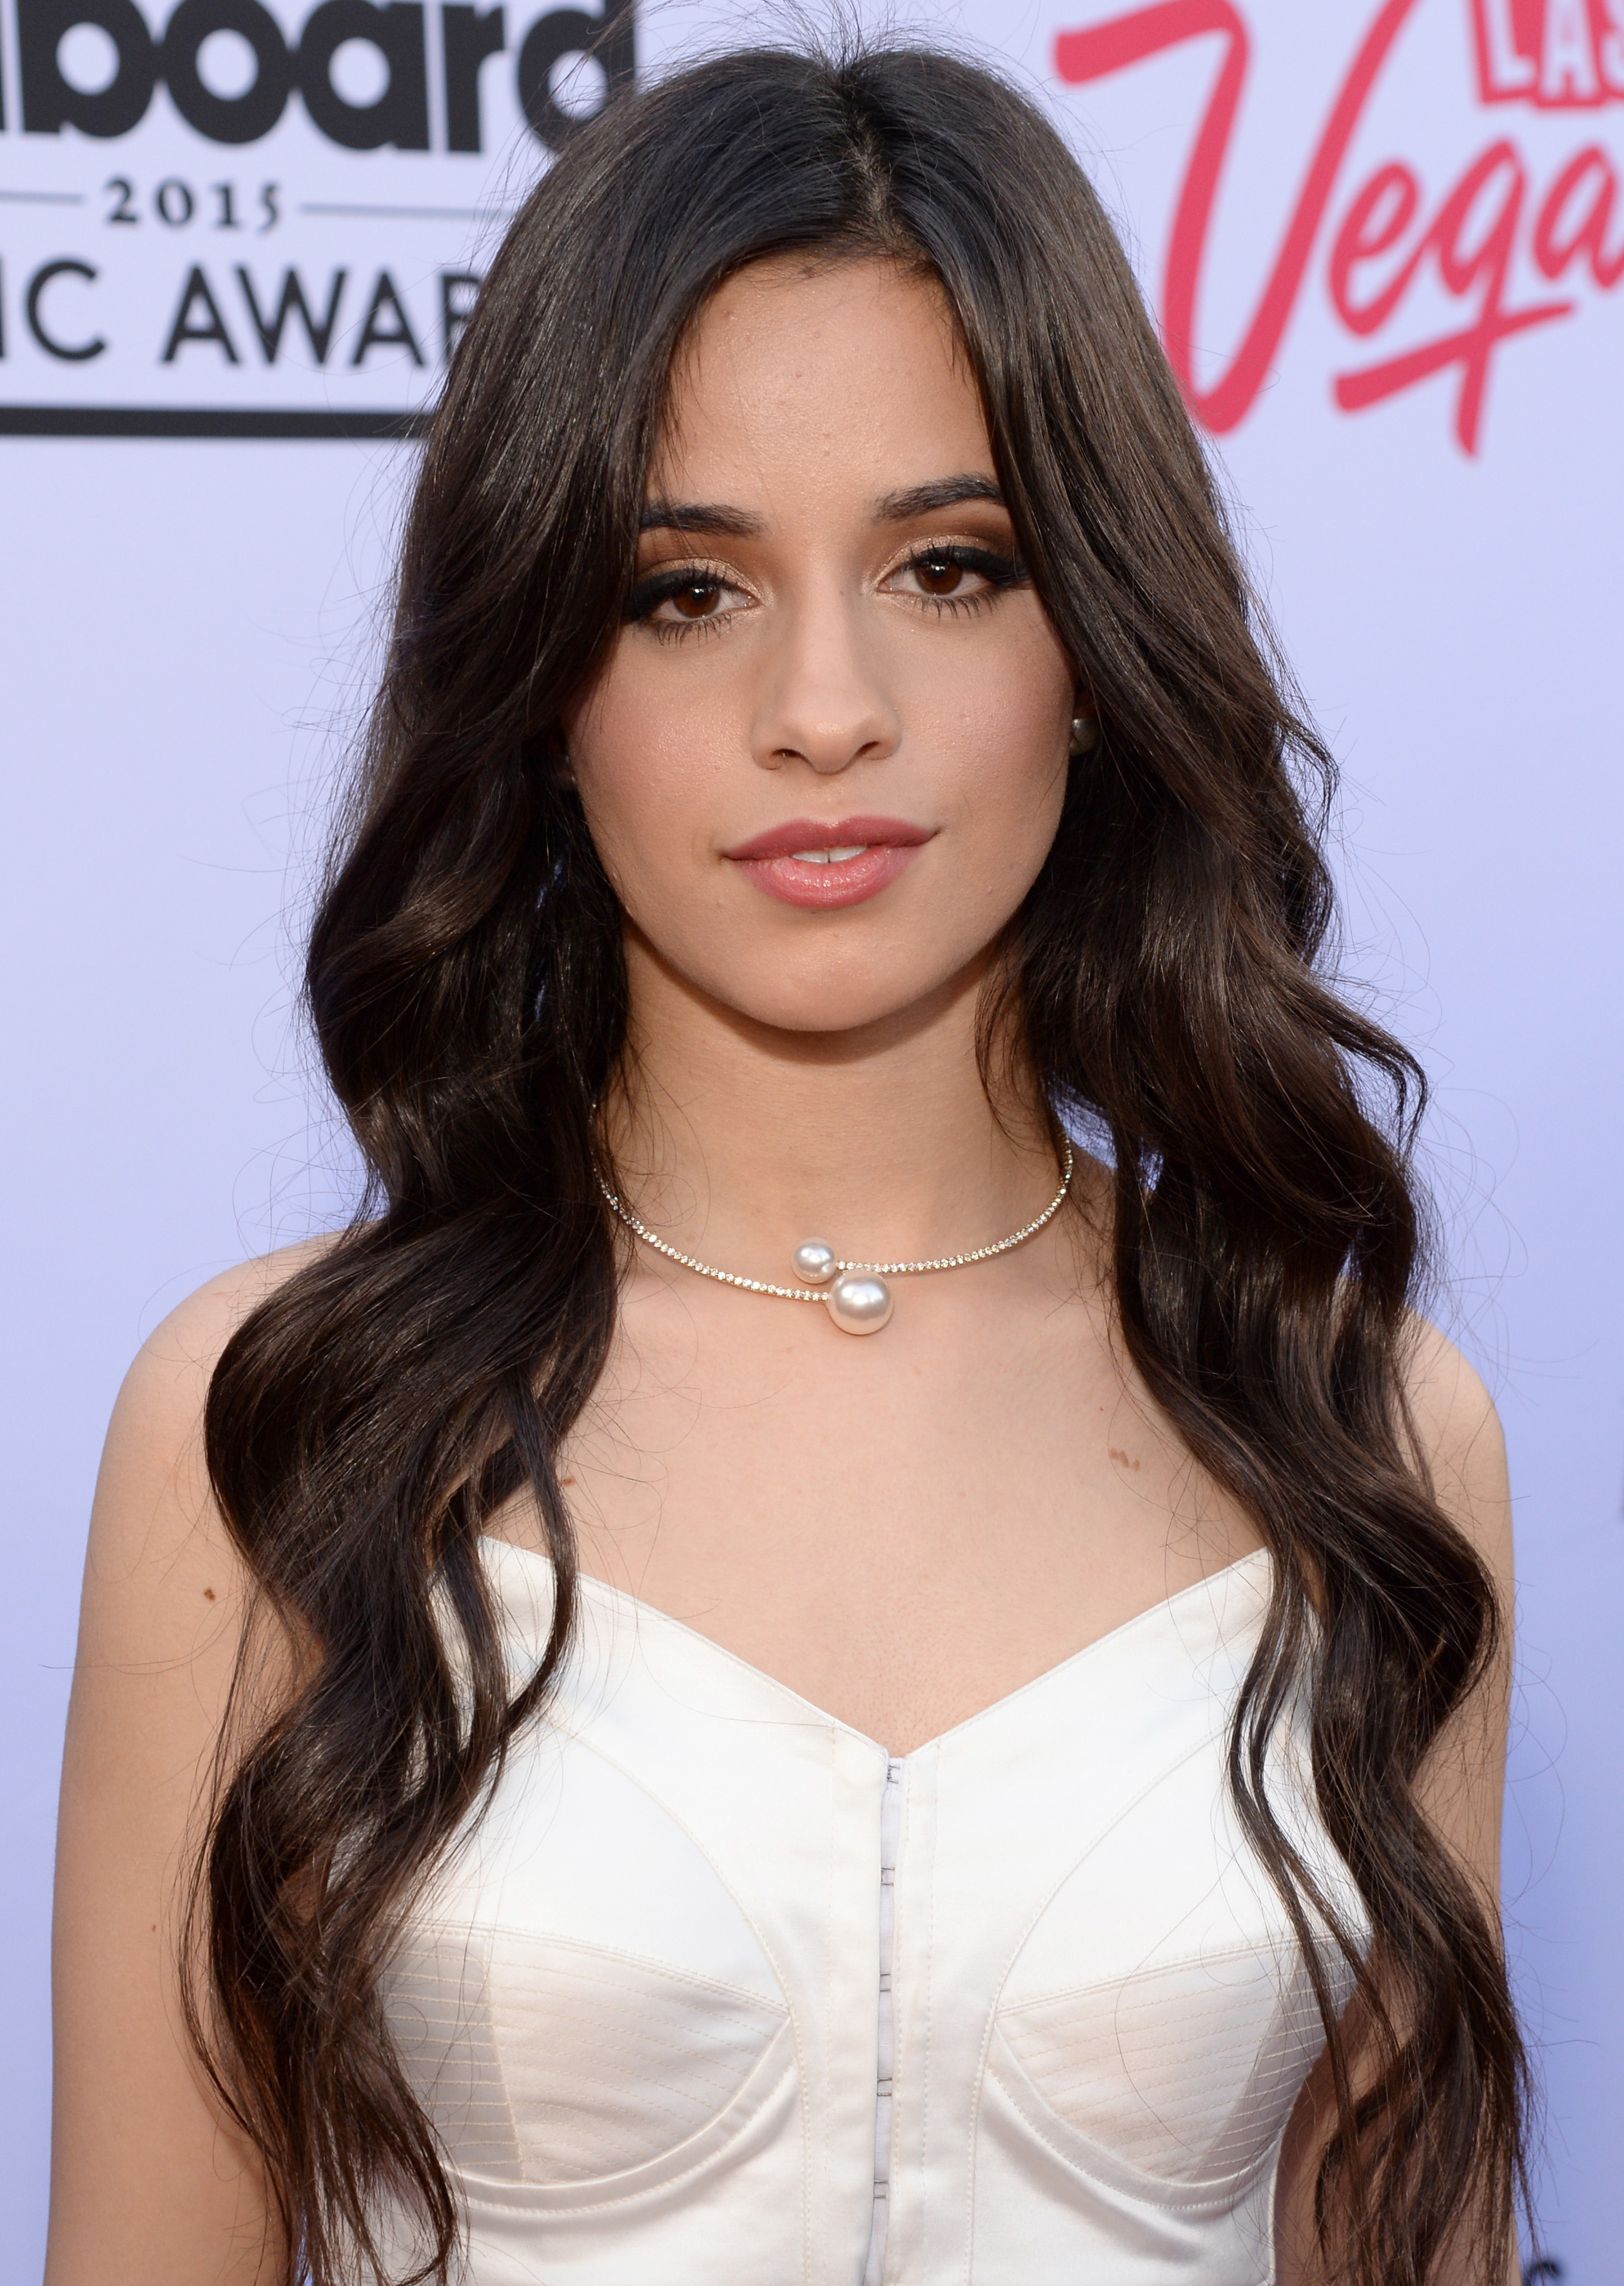 Camila Cabello Hot And Sexy Topless Photoshoots And Videos